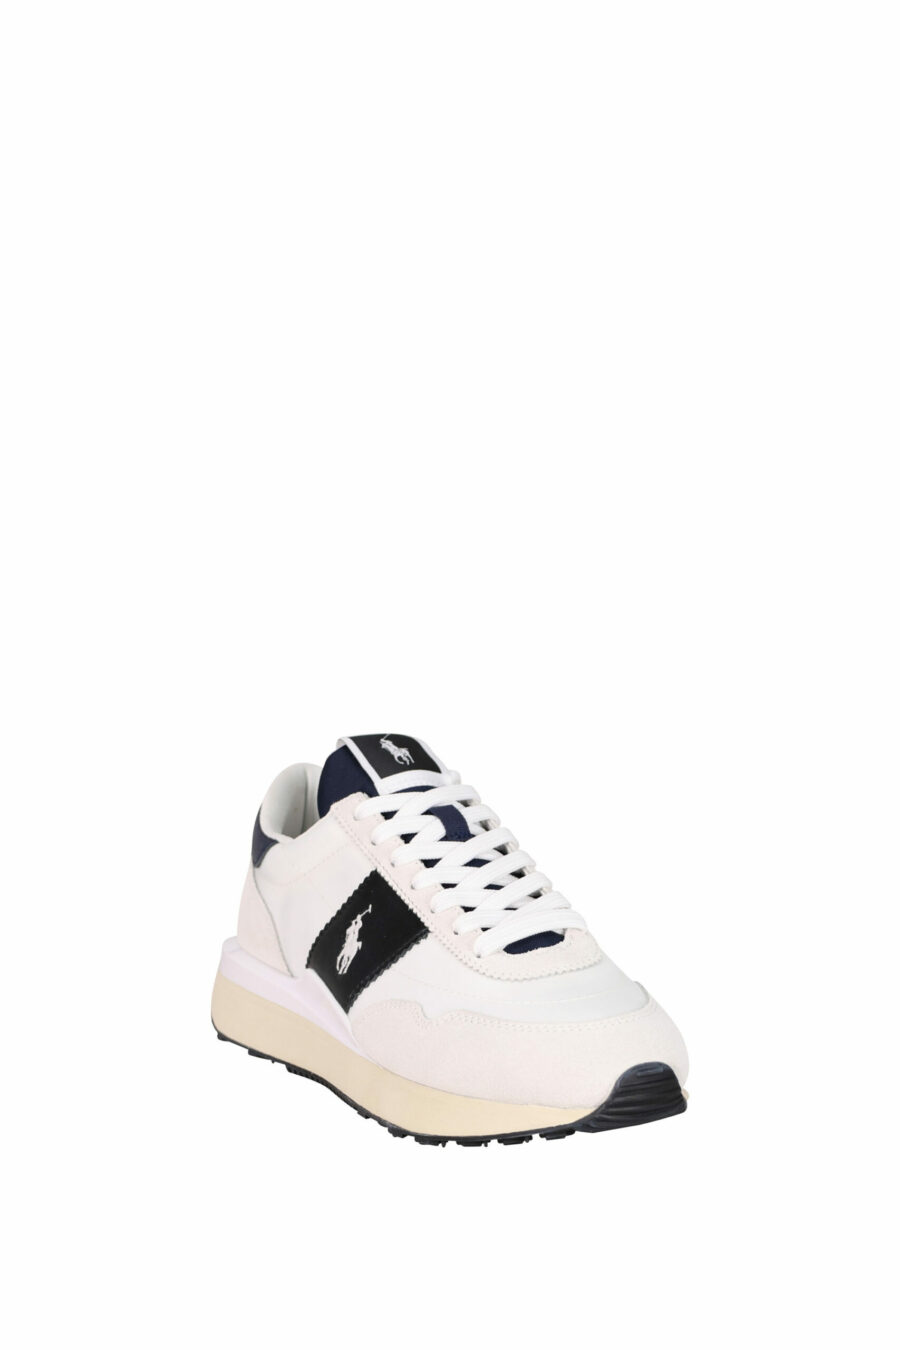 White trainers with blue "train" detail and white "polo" minilogue - 3616535114890 1 scaled